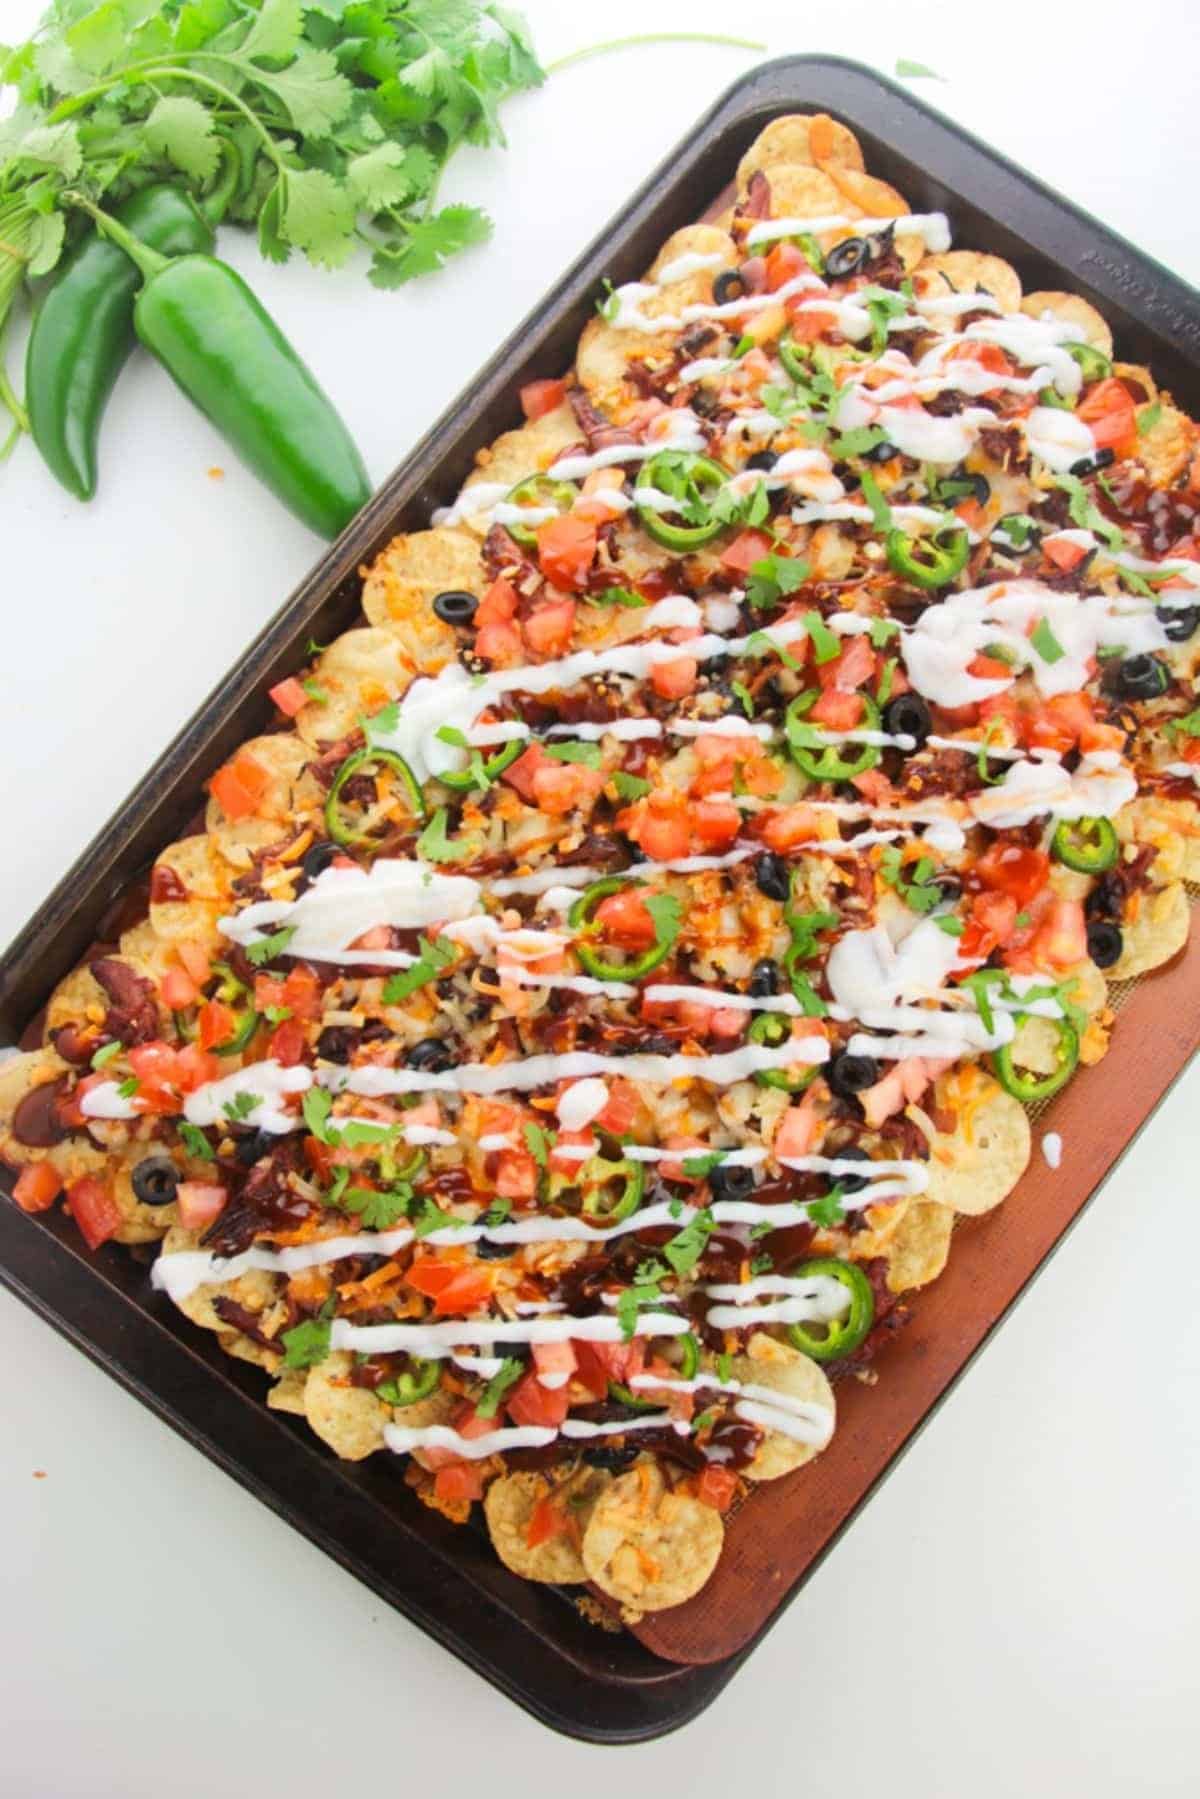 A tray of loaded nachos with jalapeños, tomatoes, black olives, and a drizzle of sour cream on a white background.